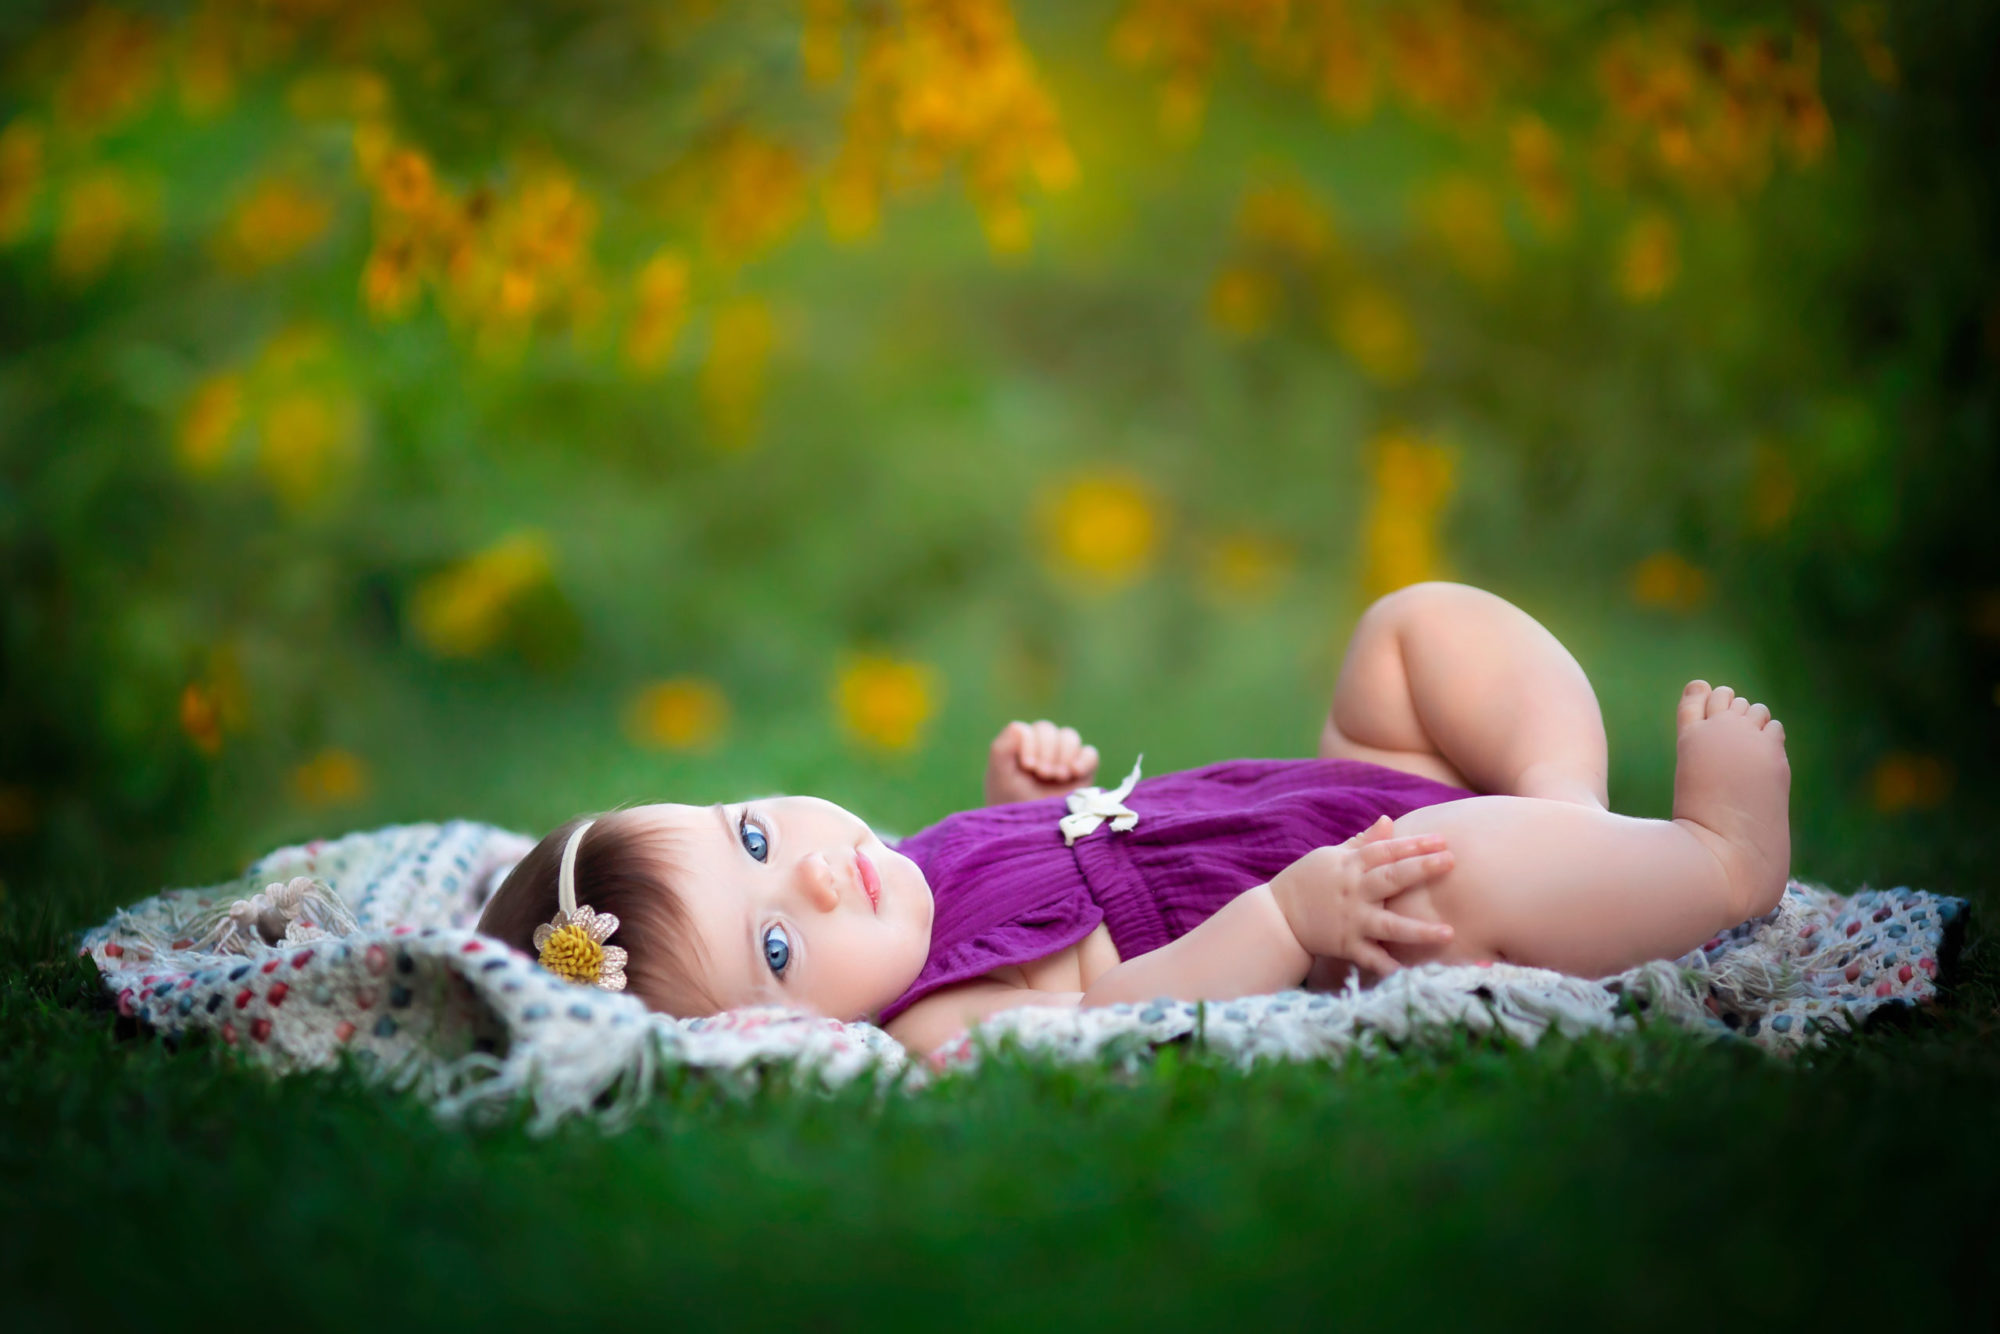 Meet Shueyville IA Photographer Michelle Zumbach who specializes in maternity, newborn & baby photography available in Shueyville, Cedar Rapids and Coralville, IA.